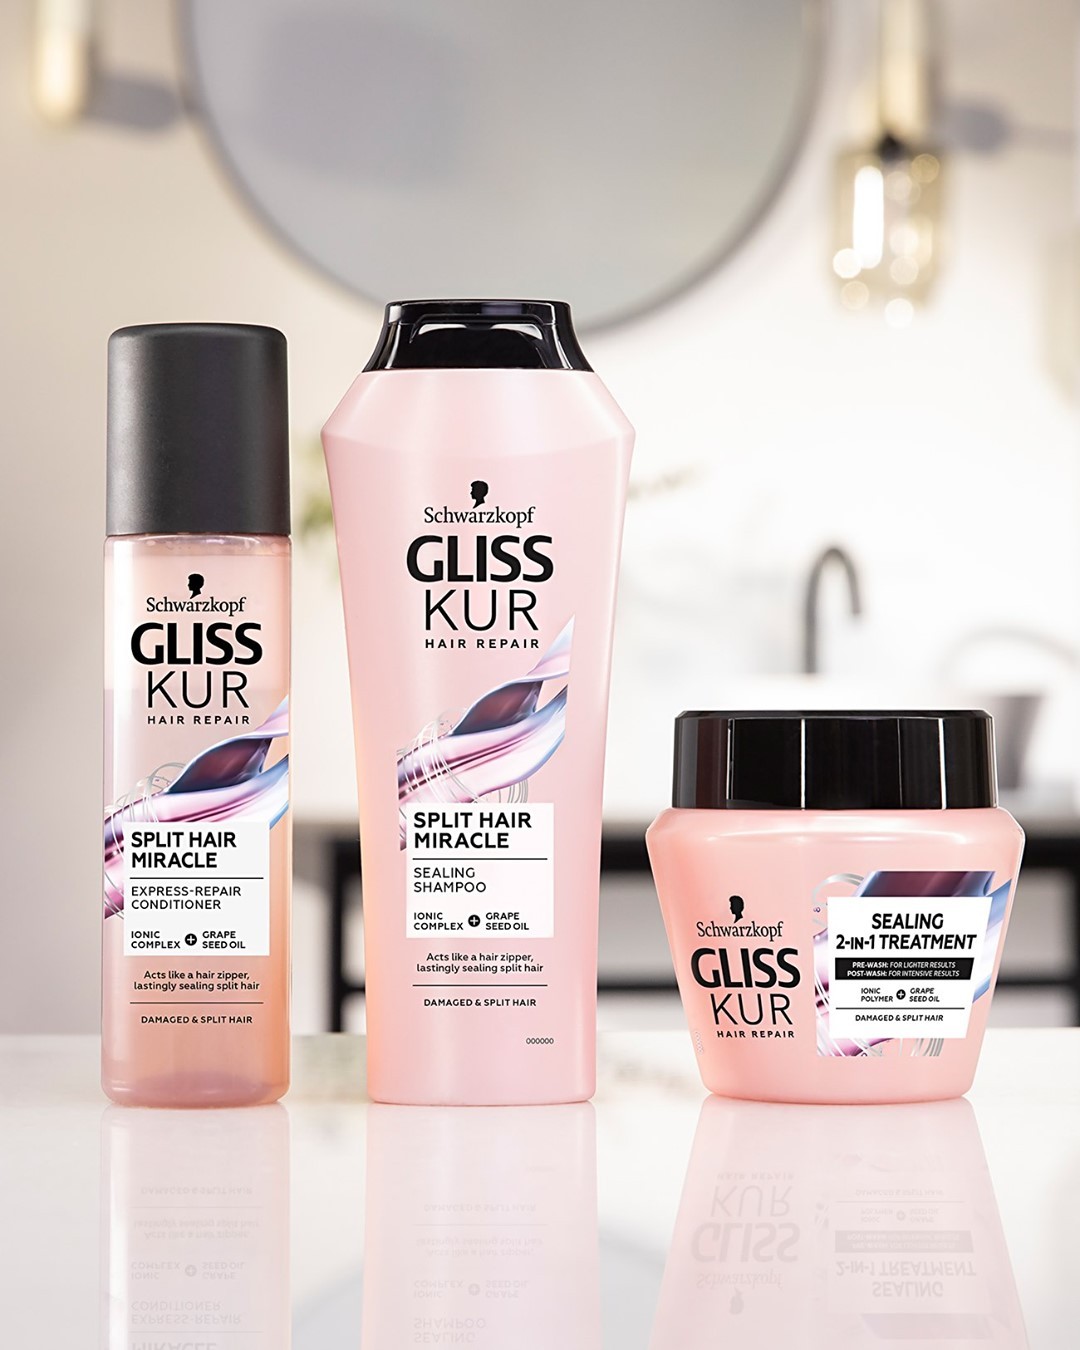 Schwarzkopf International - New products from Gliss seal your split ends like a miracle ✨ #schwarzkopf #createyourstyle #togetherfortruebeauty #lookgoodtogether #gliss #glisskur #splithairmiracle #hai...